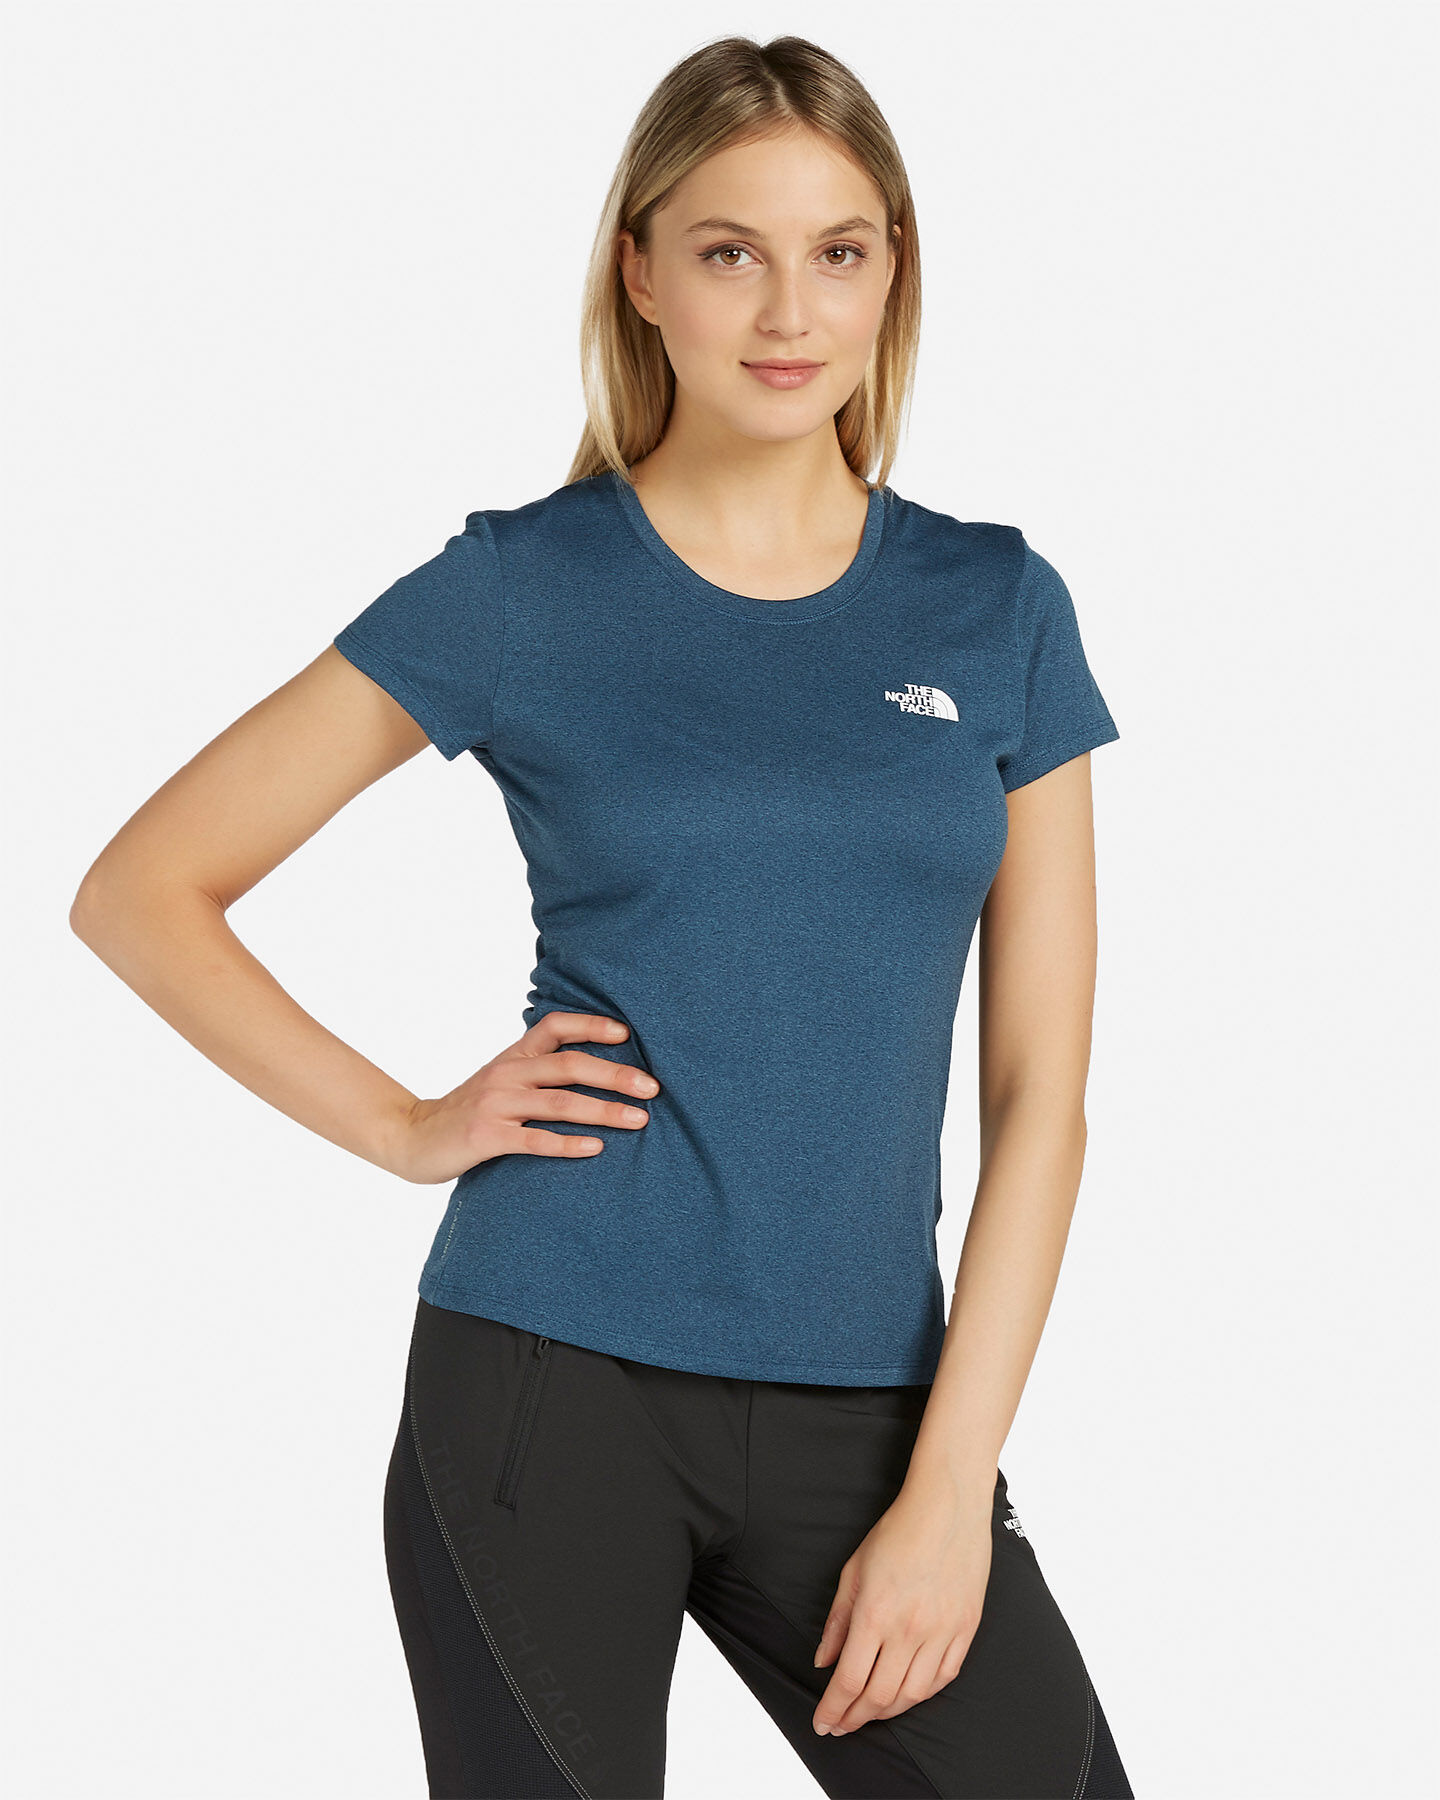  T-Shirt THE NORTH FACE REAXION AMP W S5535556 scatto 0